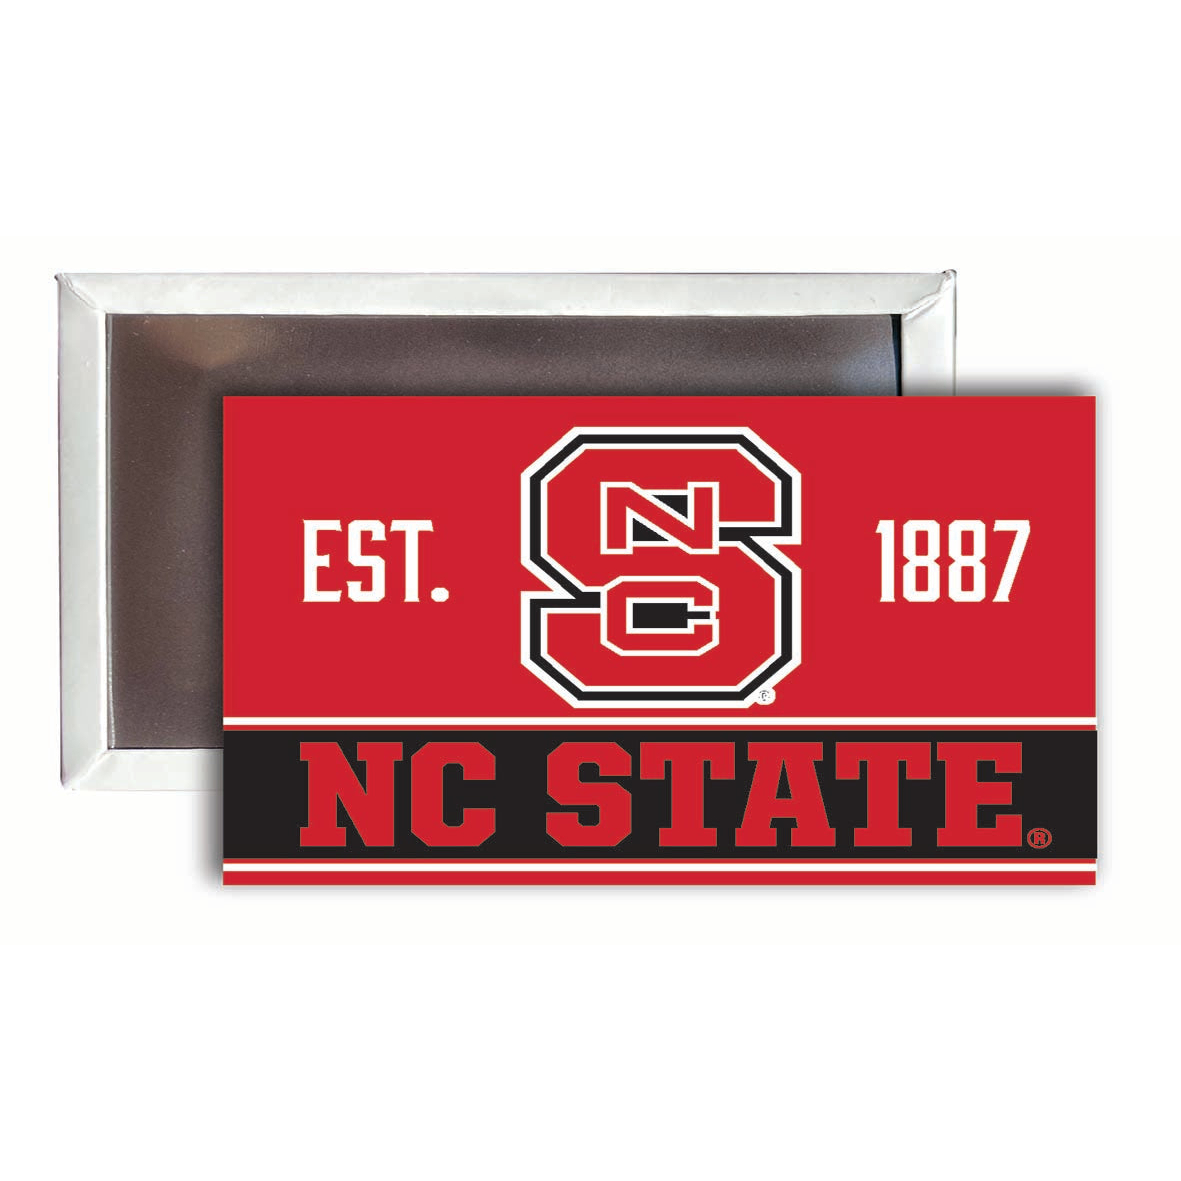 NC State Wolfpack 2x3-Inch Fridge Magnet